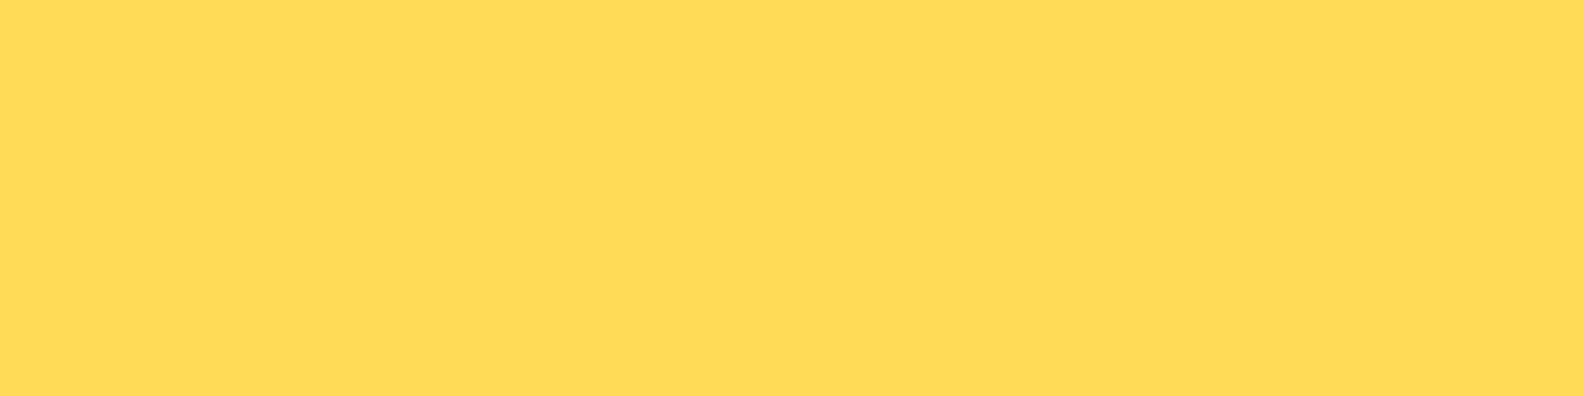 1584x396 Mustard Solid Color Background